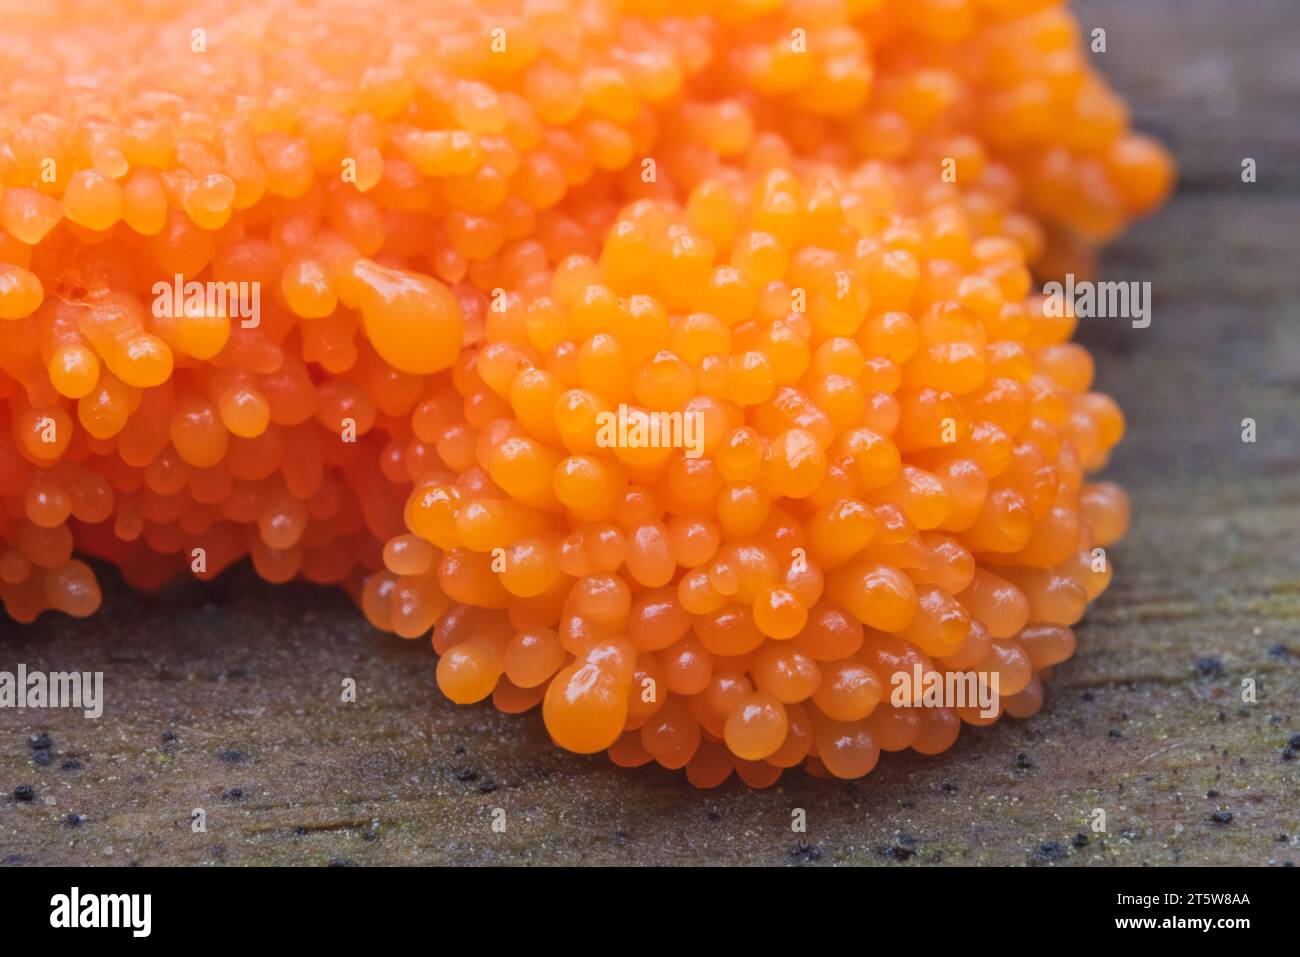 Red raspberry slime mold Tubifera ferruginosa on an old tree trunk in the forest. Rare orange mushroom close-up Stock Photo